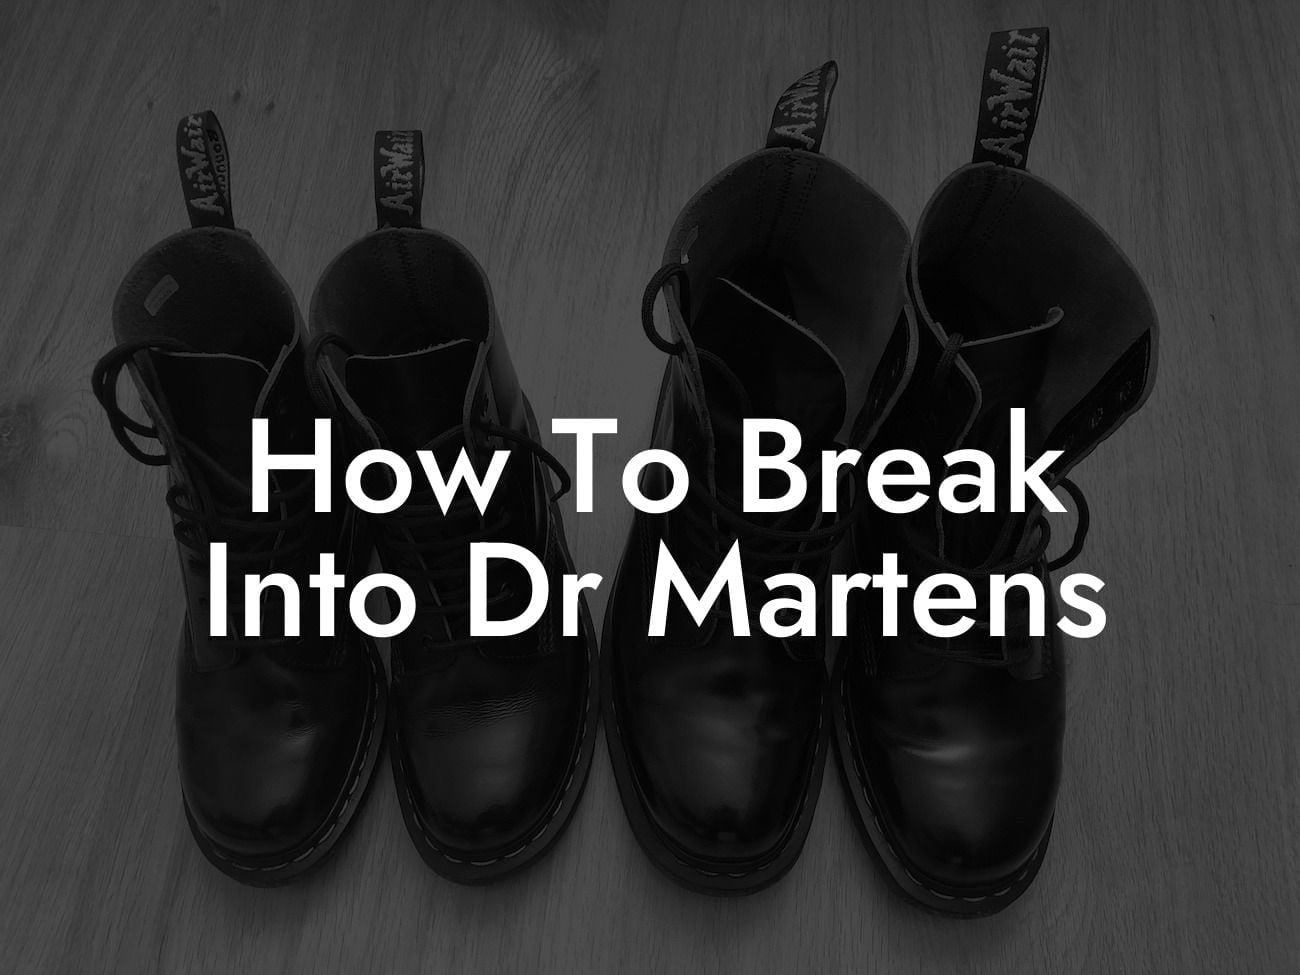 How To Break Into Dr Martens